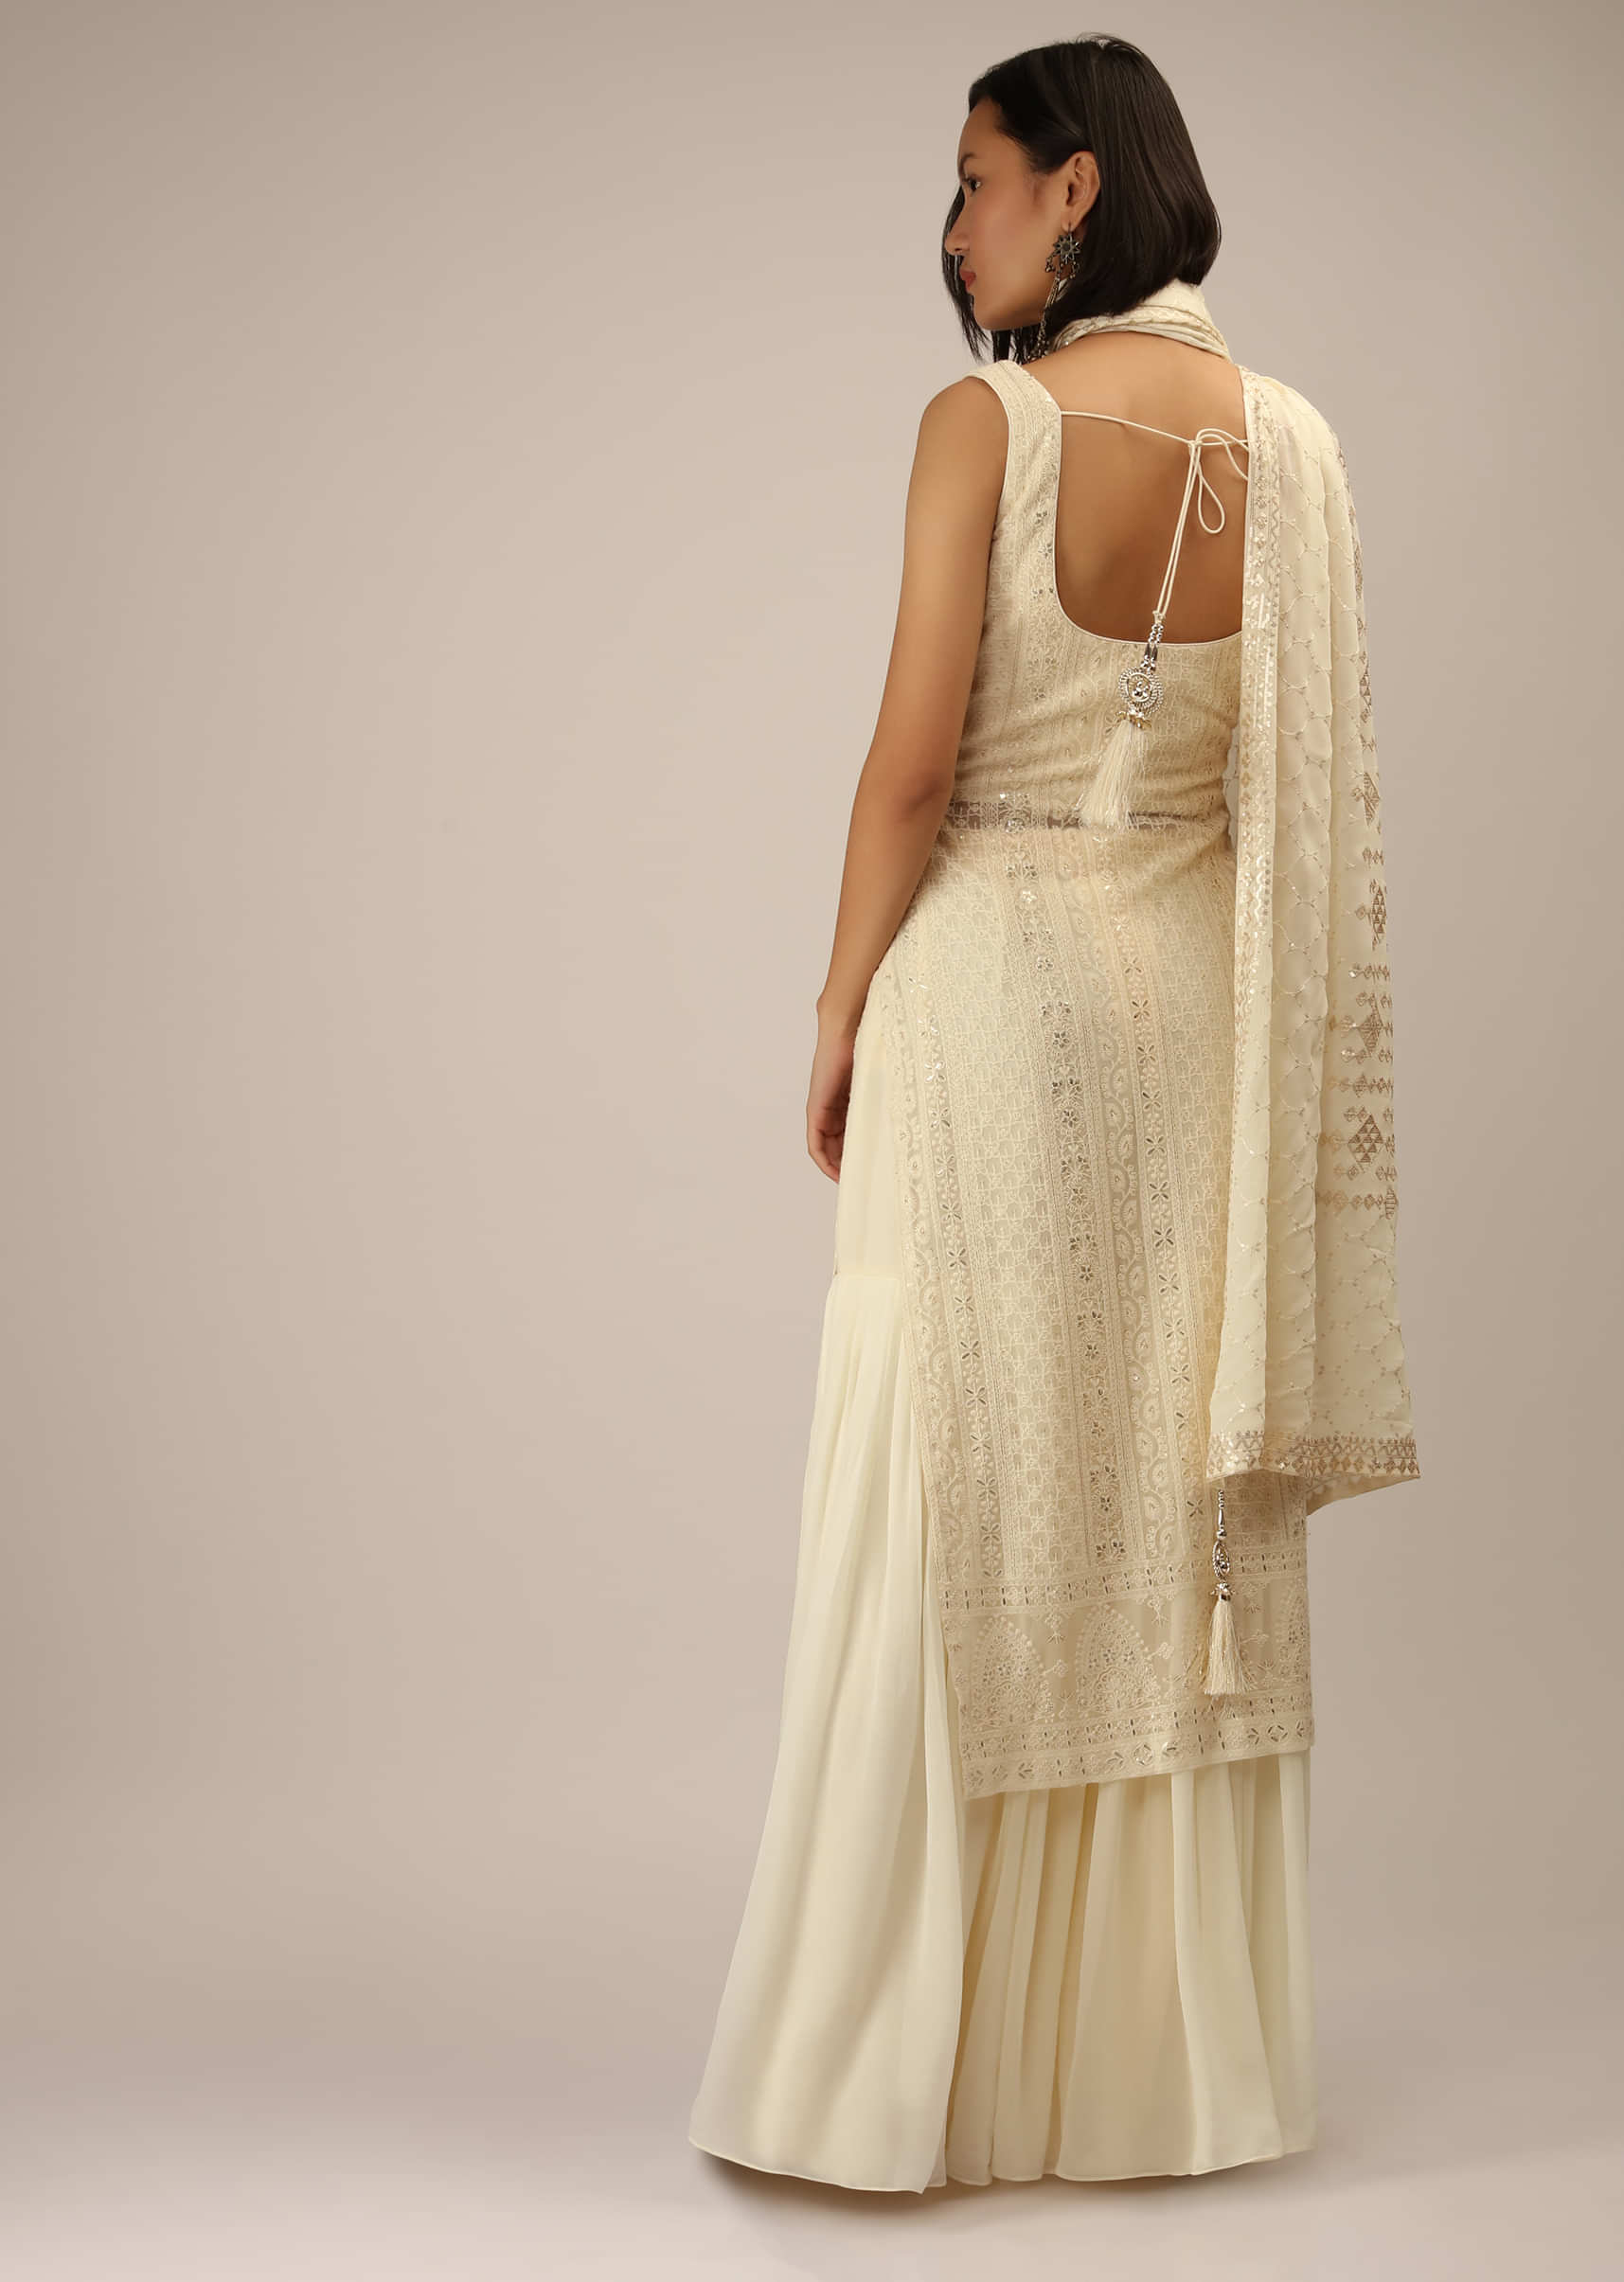 Off White Sharara Suit In Georgette With Lucknowi Thread Embroidery In Mughal Design